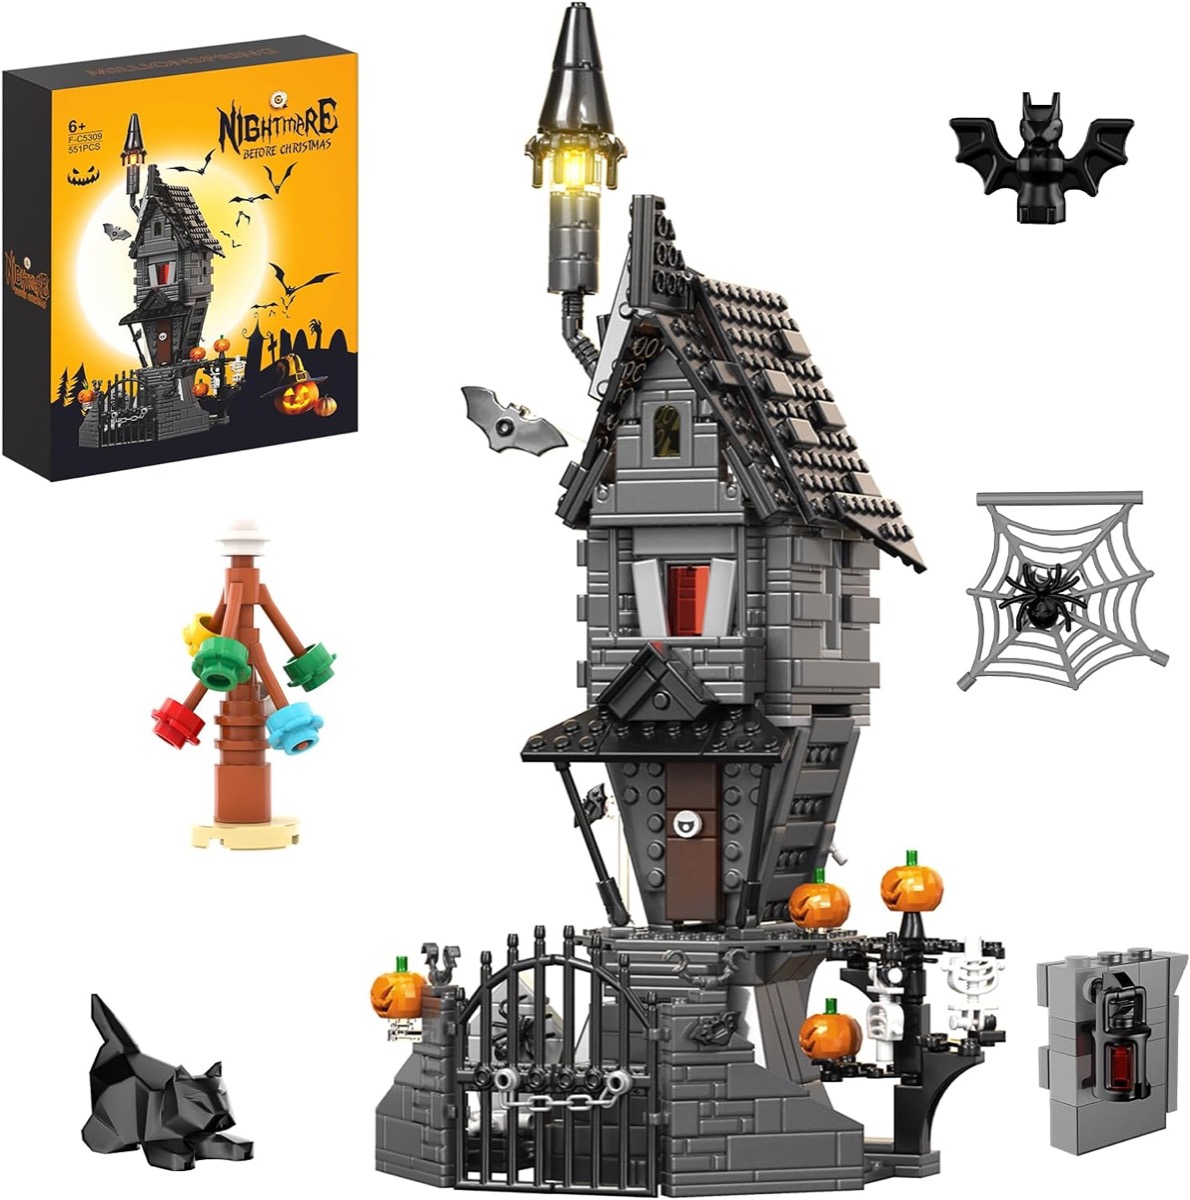 A LEGO version of Jack's and Sally Haunted House from "The Nightmare Before Christmas" 